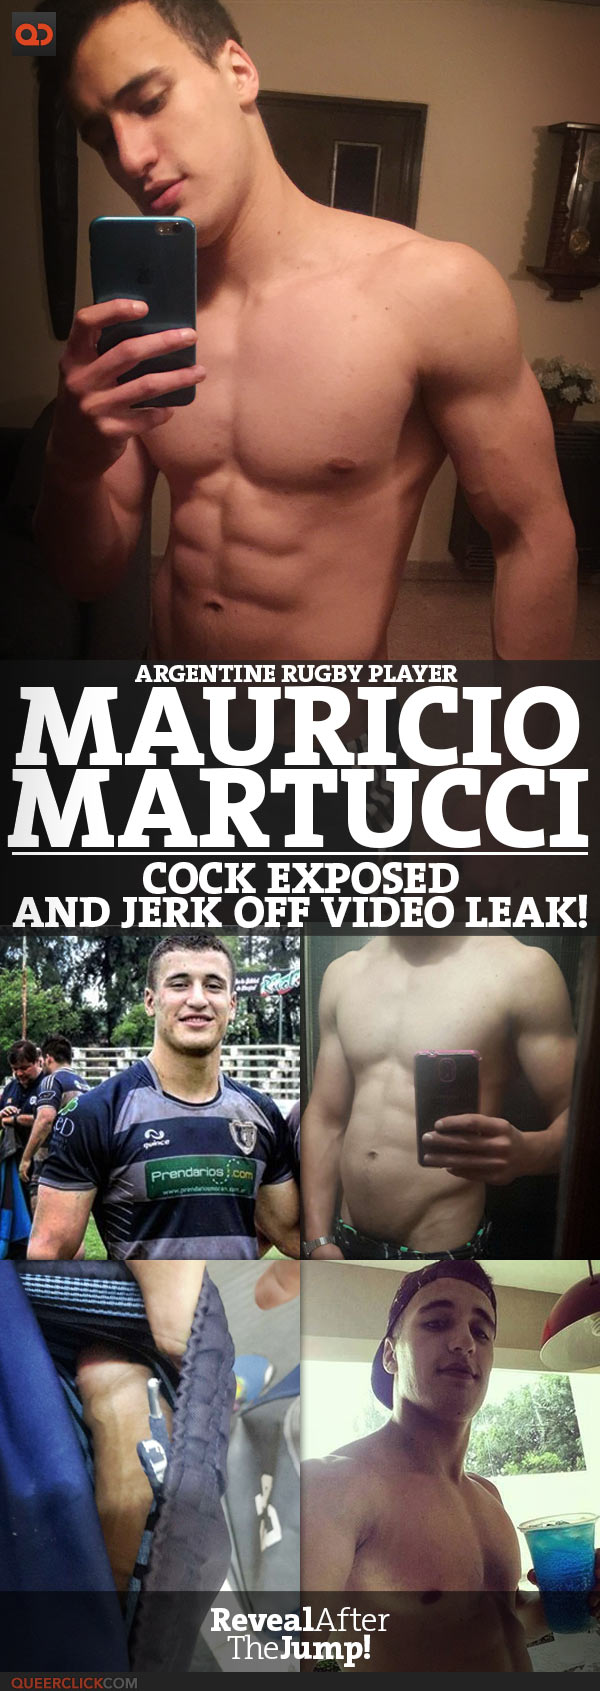 Mauricio Martucci, Argentine Rugby Player, Nude Selfies And Jerk Off Video Leak!